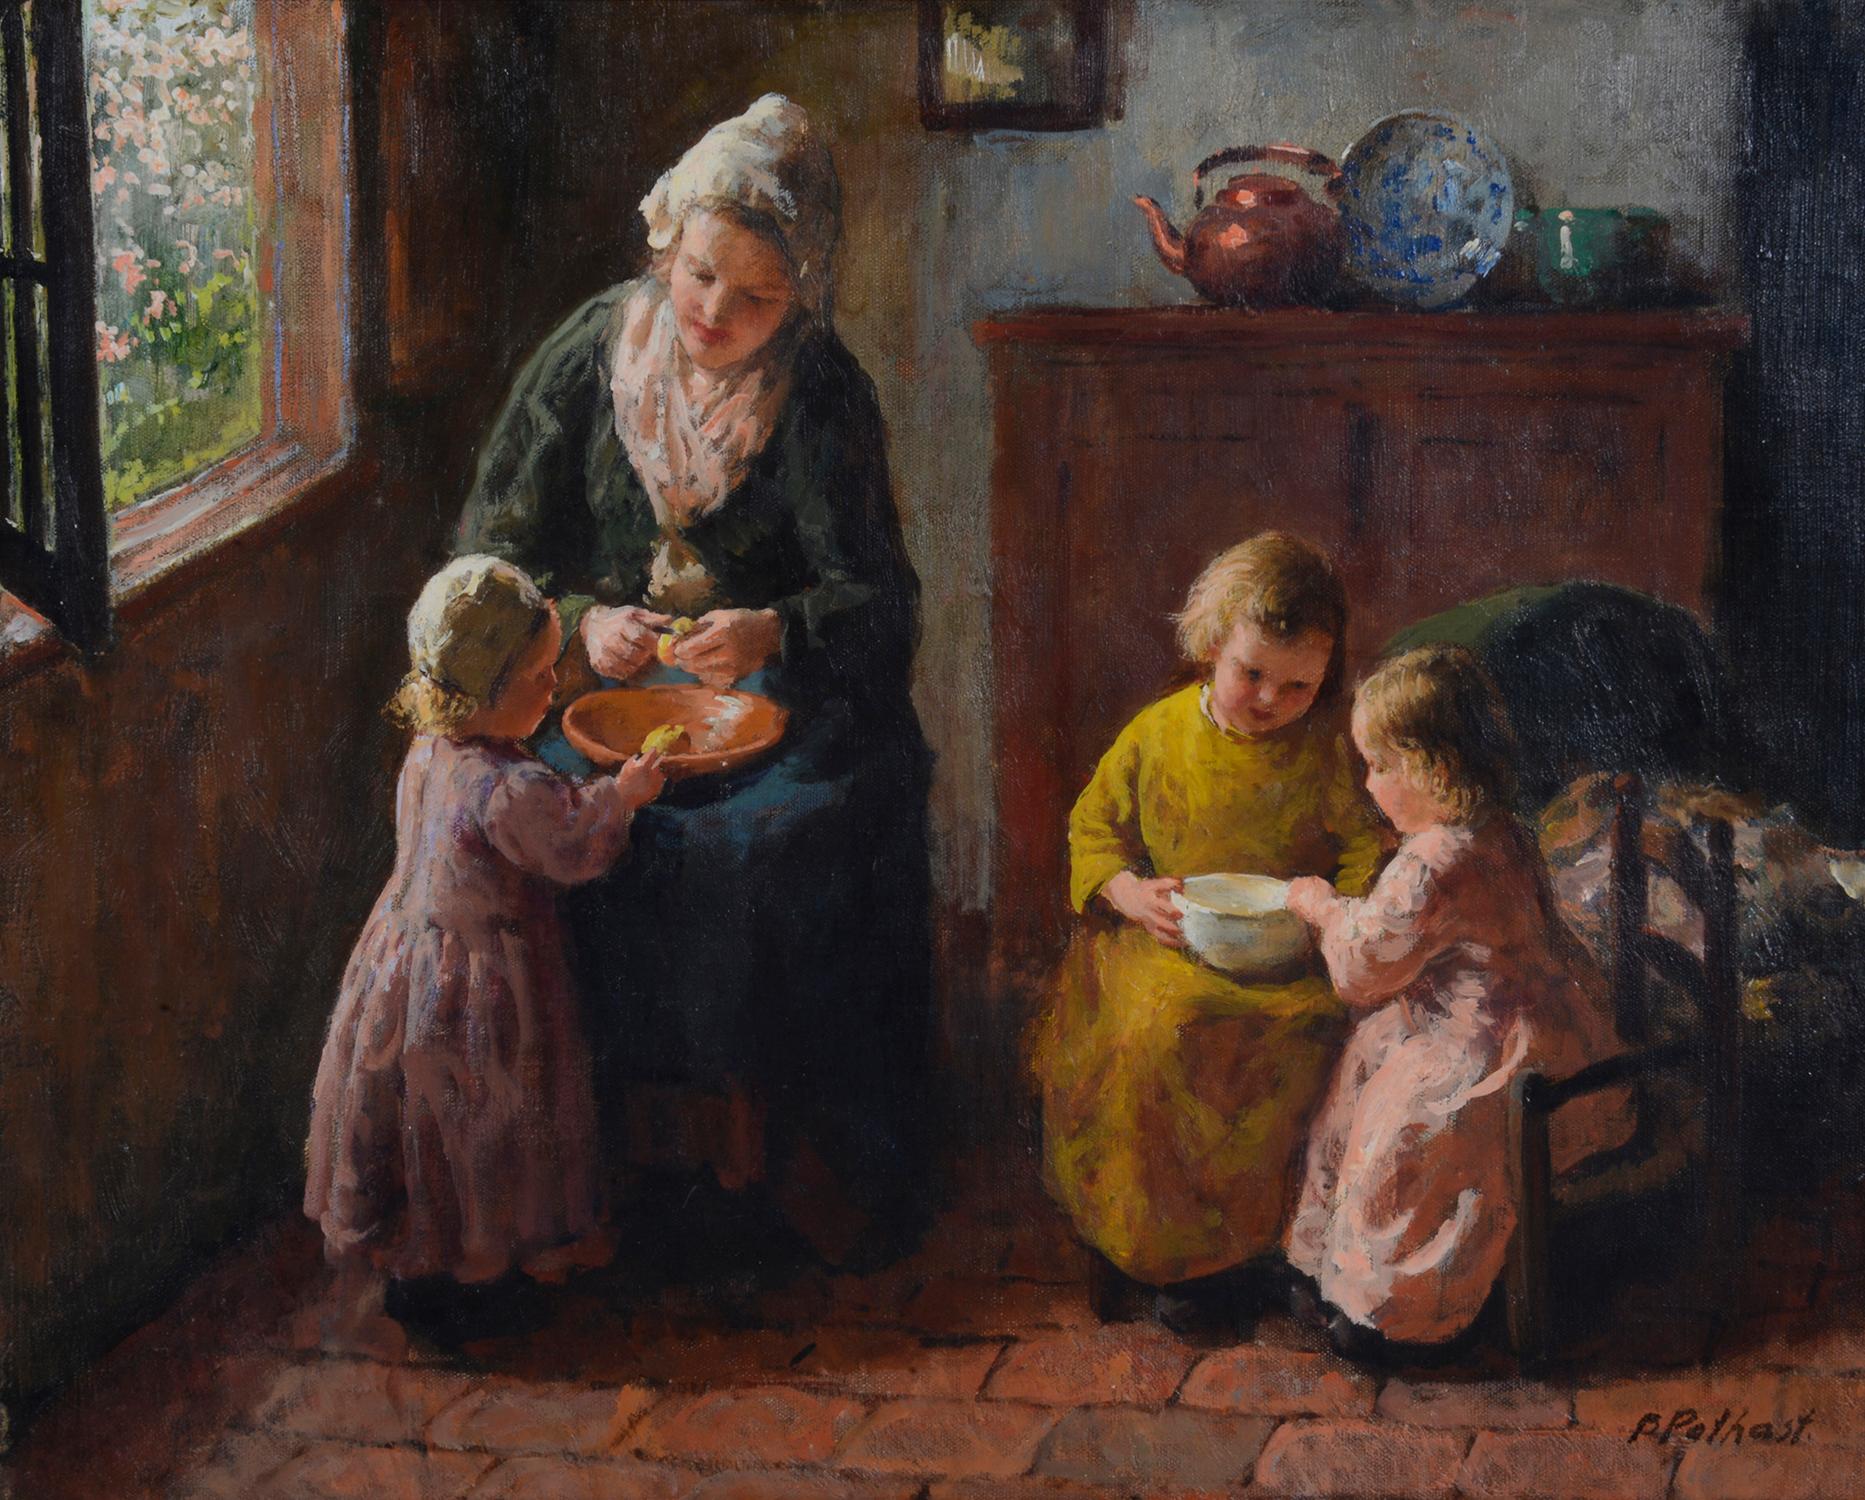 Oil on canvas painting of mother and child by Bernard Pothast, 19th century

Bernard Pothast was a Belgian-born Dutch painter. His subjects consisted of mothers with their children, using traditional Academic Realism to create portraits of